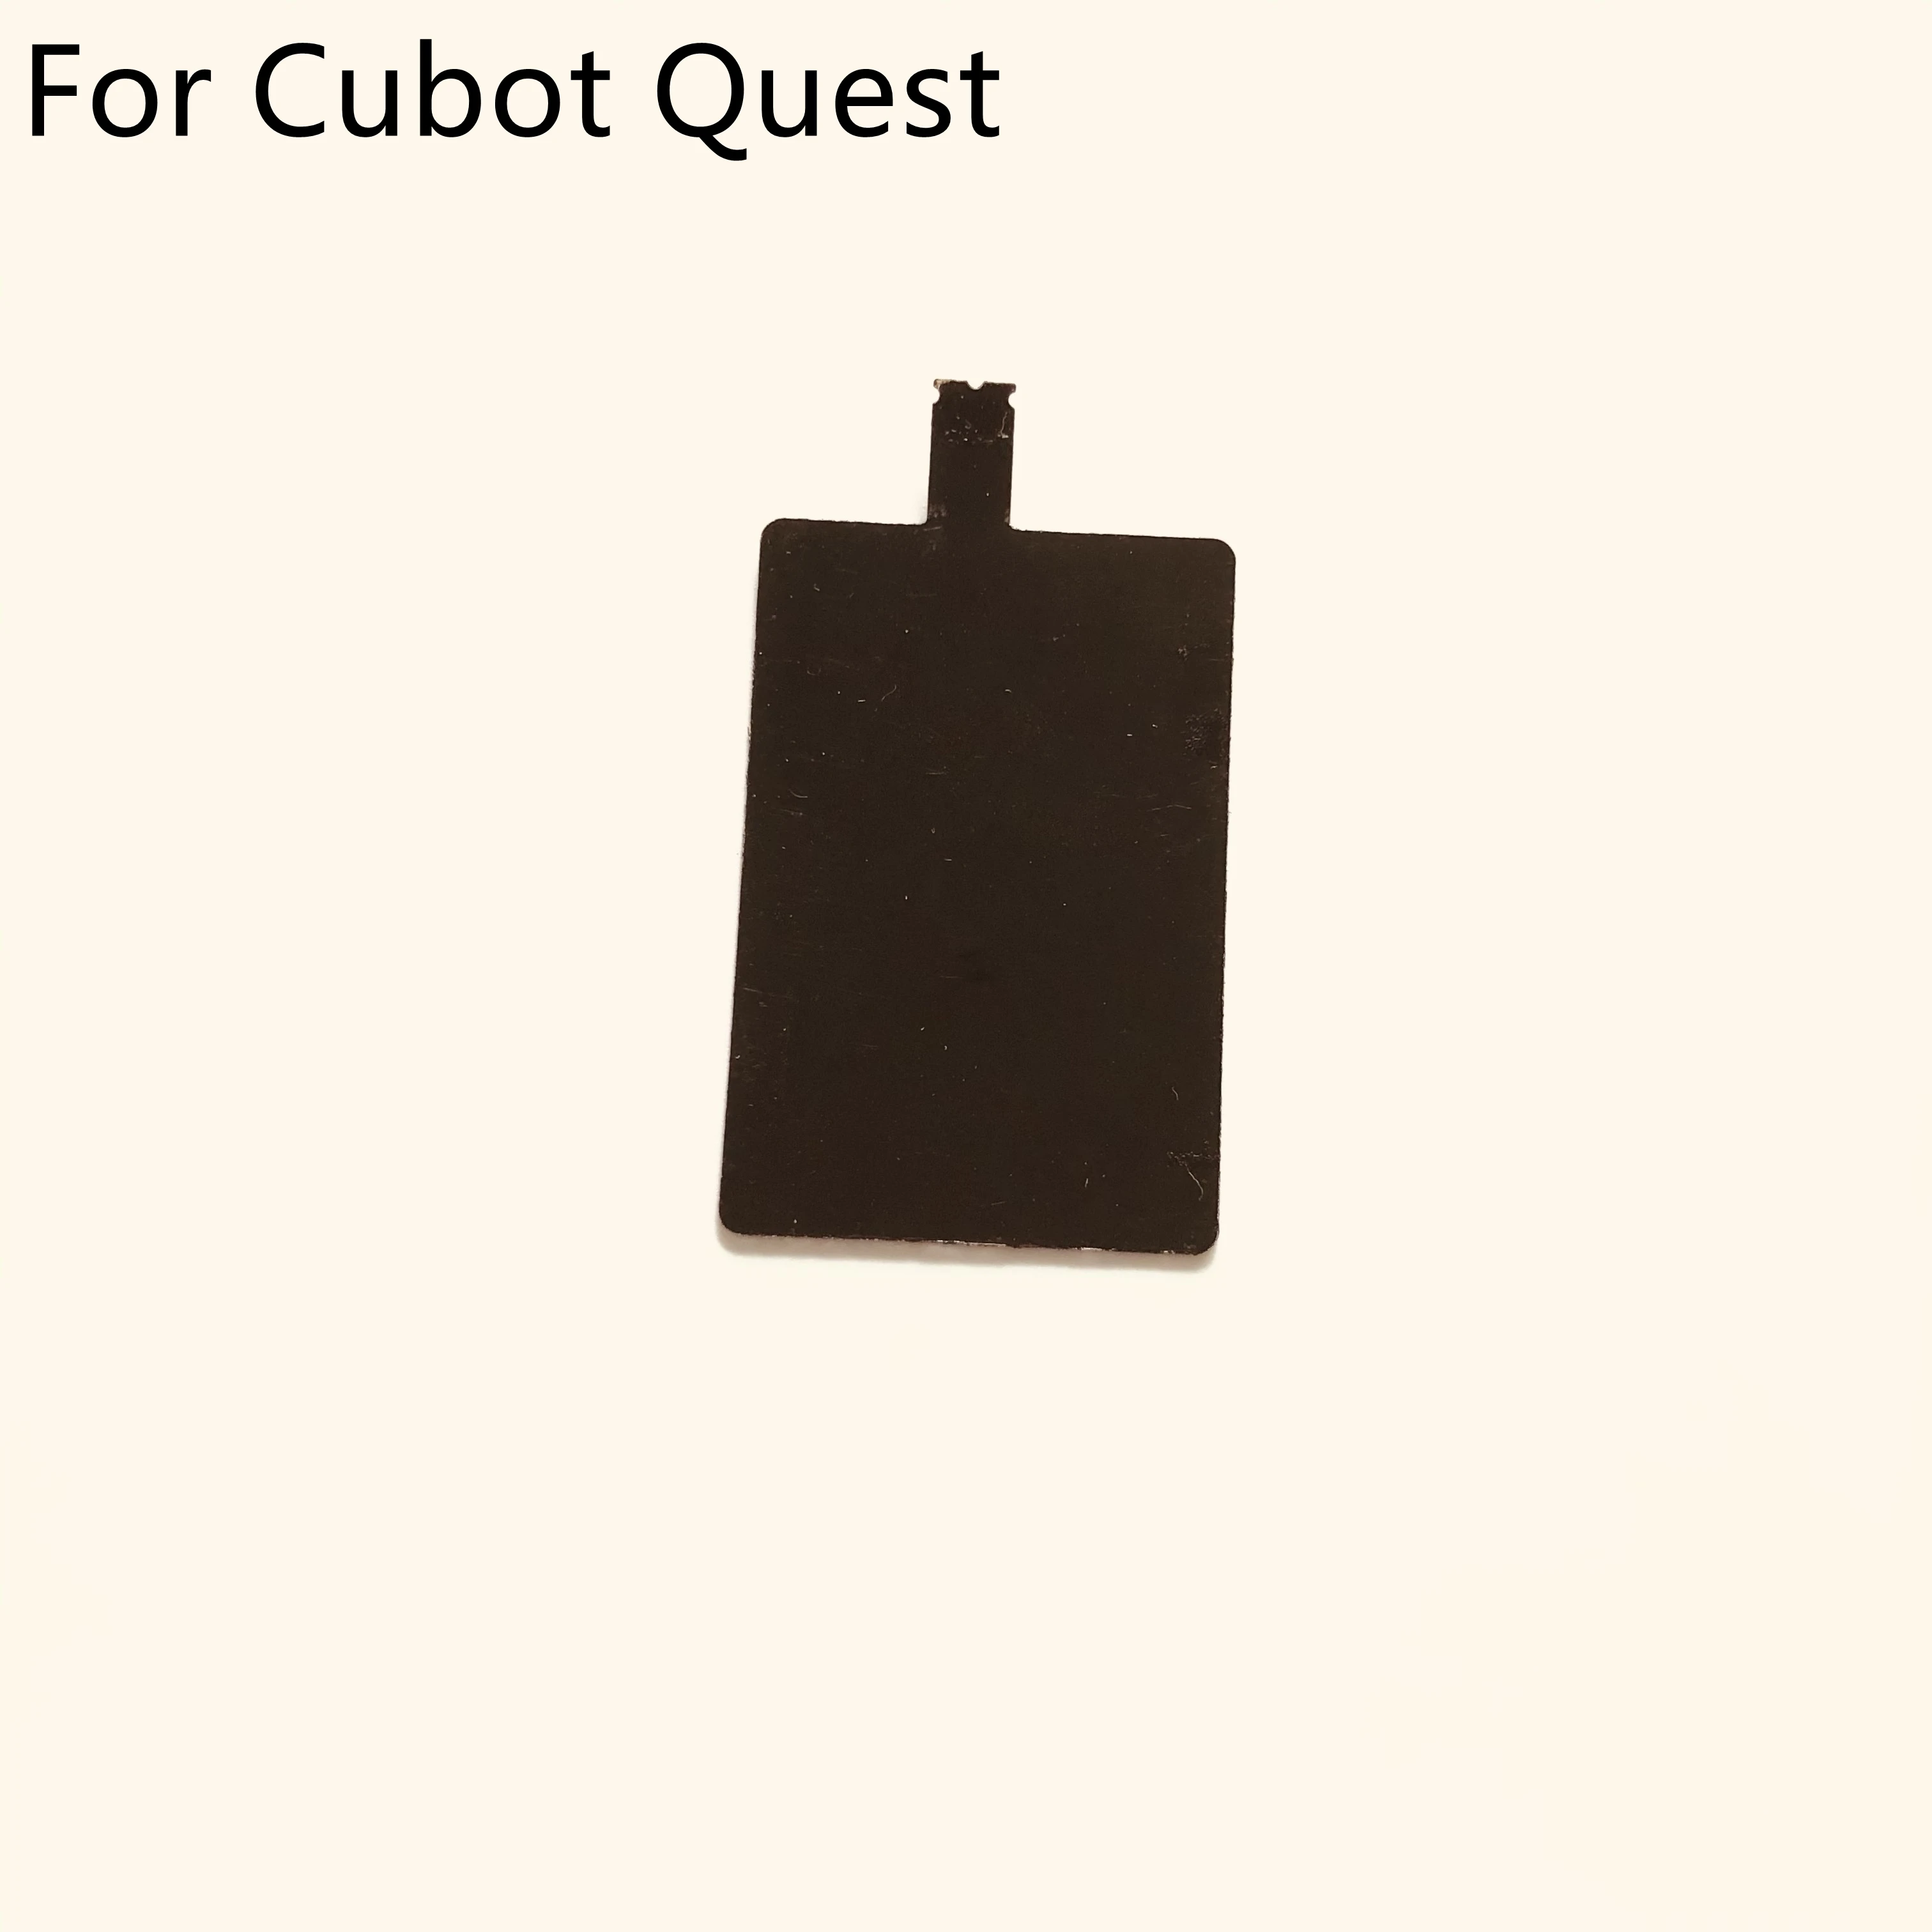 Cubot Quest Used Phone NFC For Cubot Quest MT6762 Octa-Core 5.5" 1440x720 Free Shipping